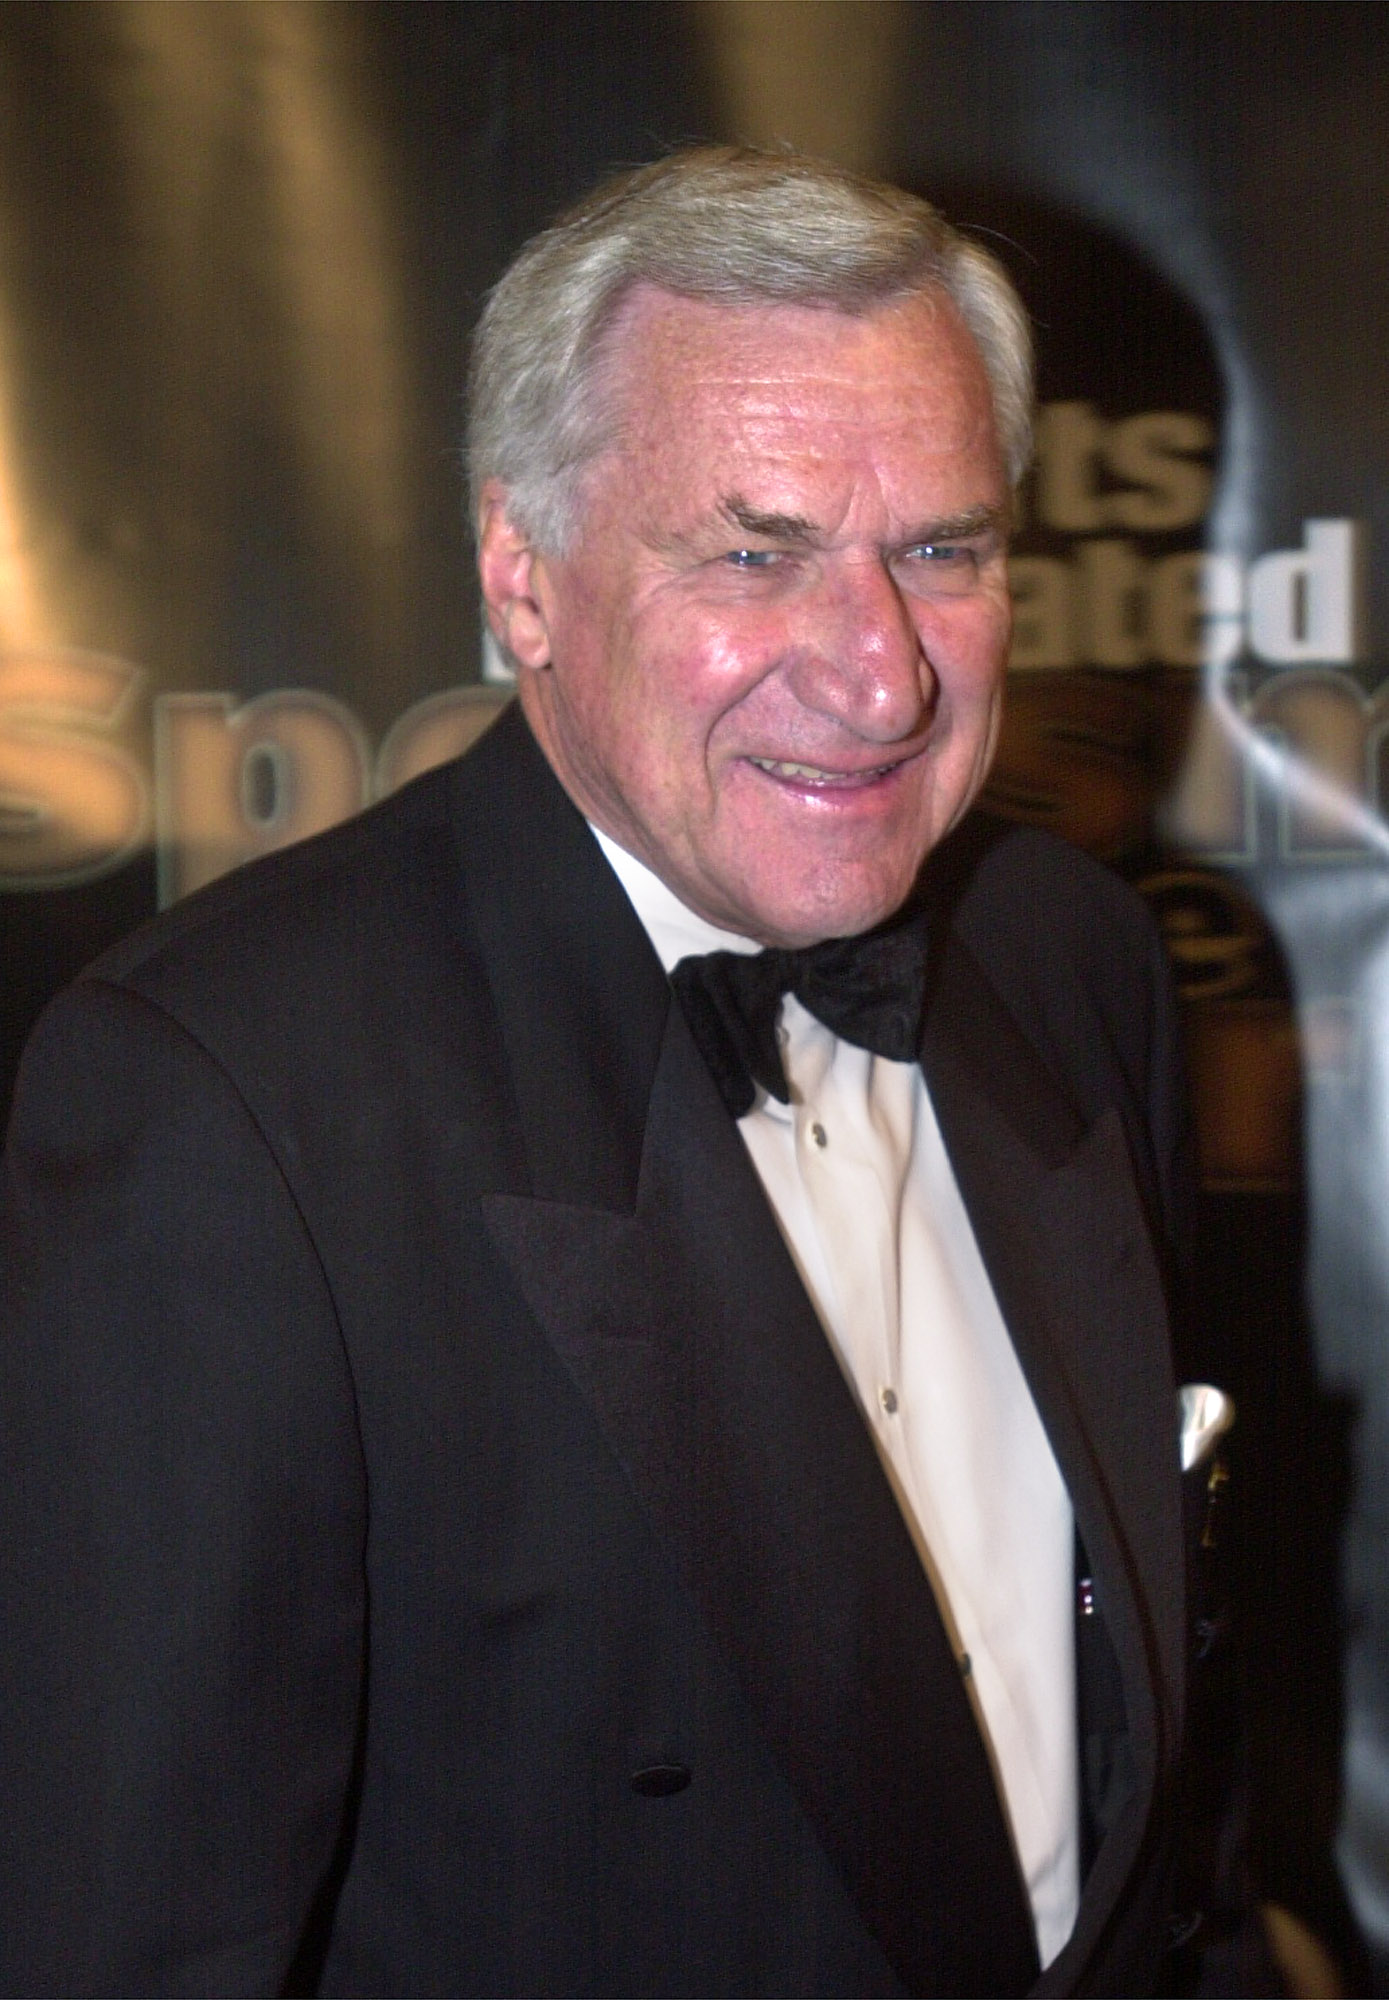 383229 03: Former University of North Carolina basketball coach Dean Smith attends the Sports Illustrated Sportsman of the Year 2000 awards ceremony December 12, 2000 in New York City. (Photo by Chris Hondros/Newsmakers)